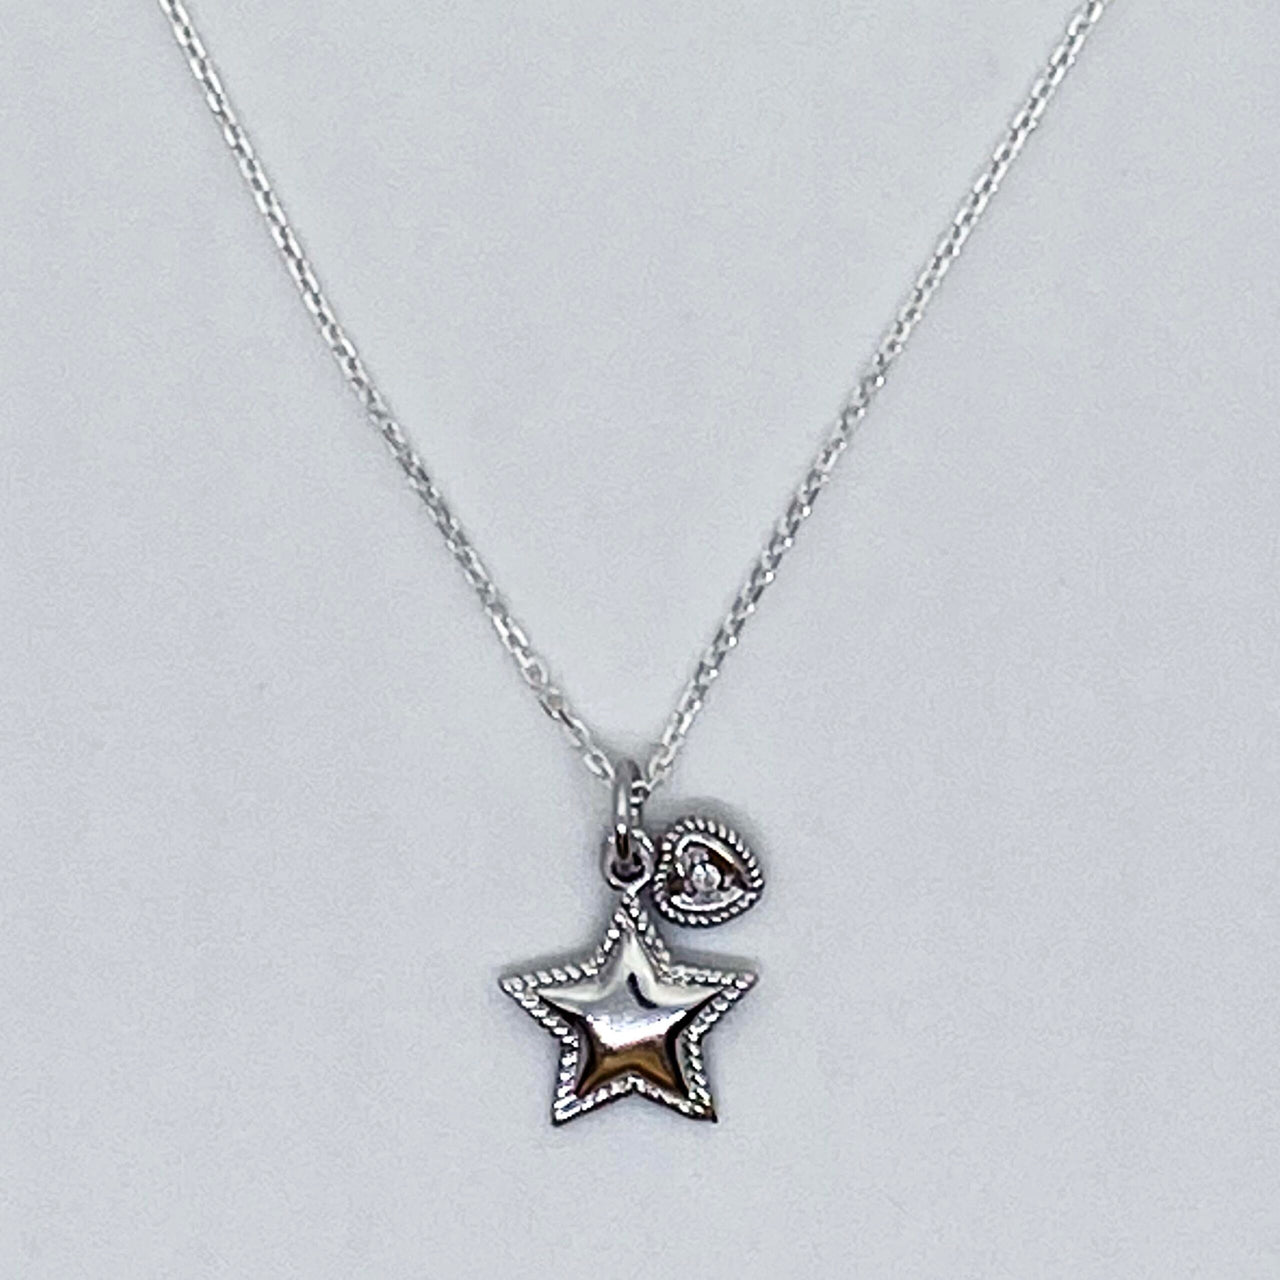 Star And Heart Necklace Sterling Silver Jewelry